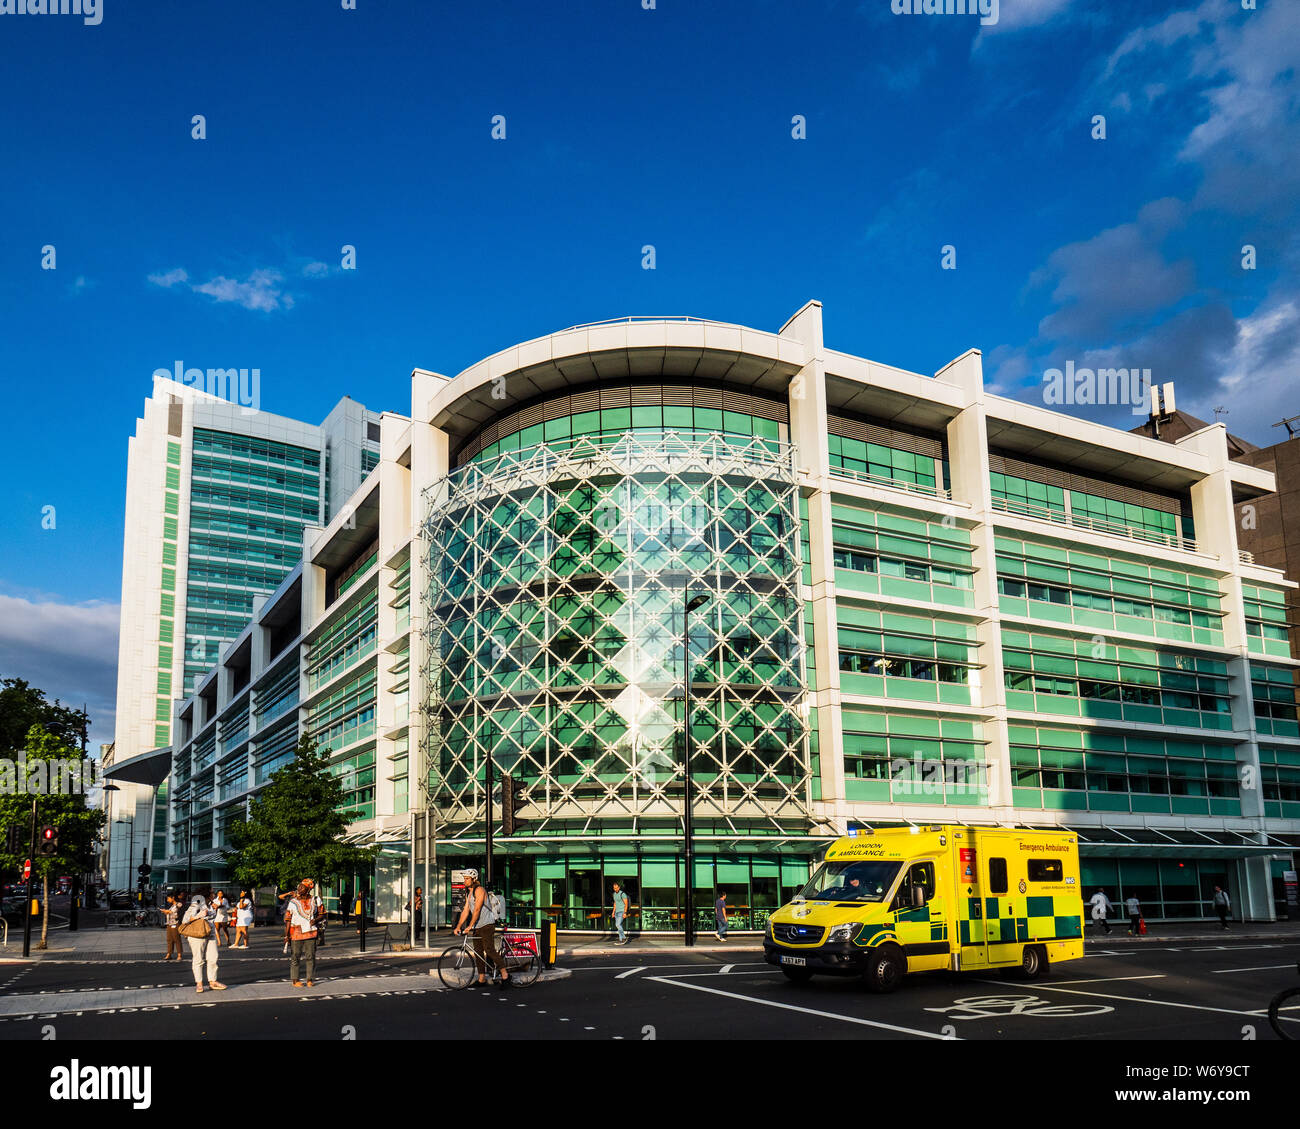 University College Hospital UCH London - emergency ambulance outside the hospital located on Euston Road in the Bloomsbury district of Central London Stock Photo